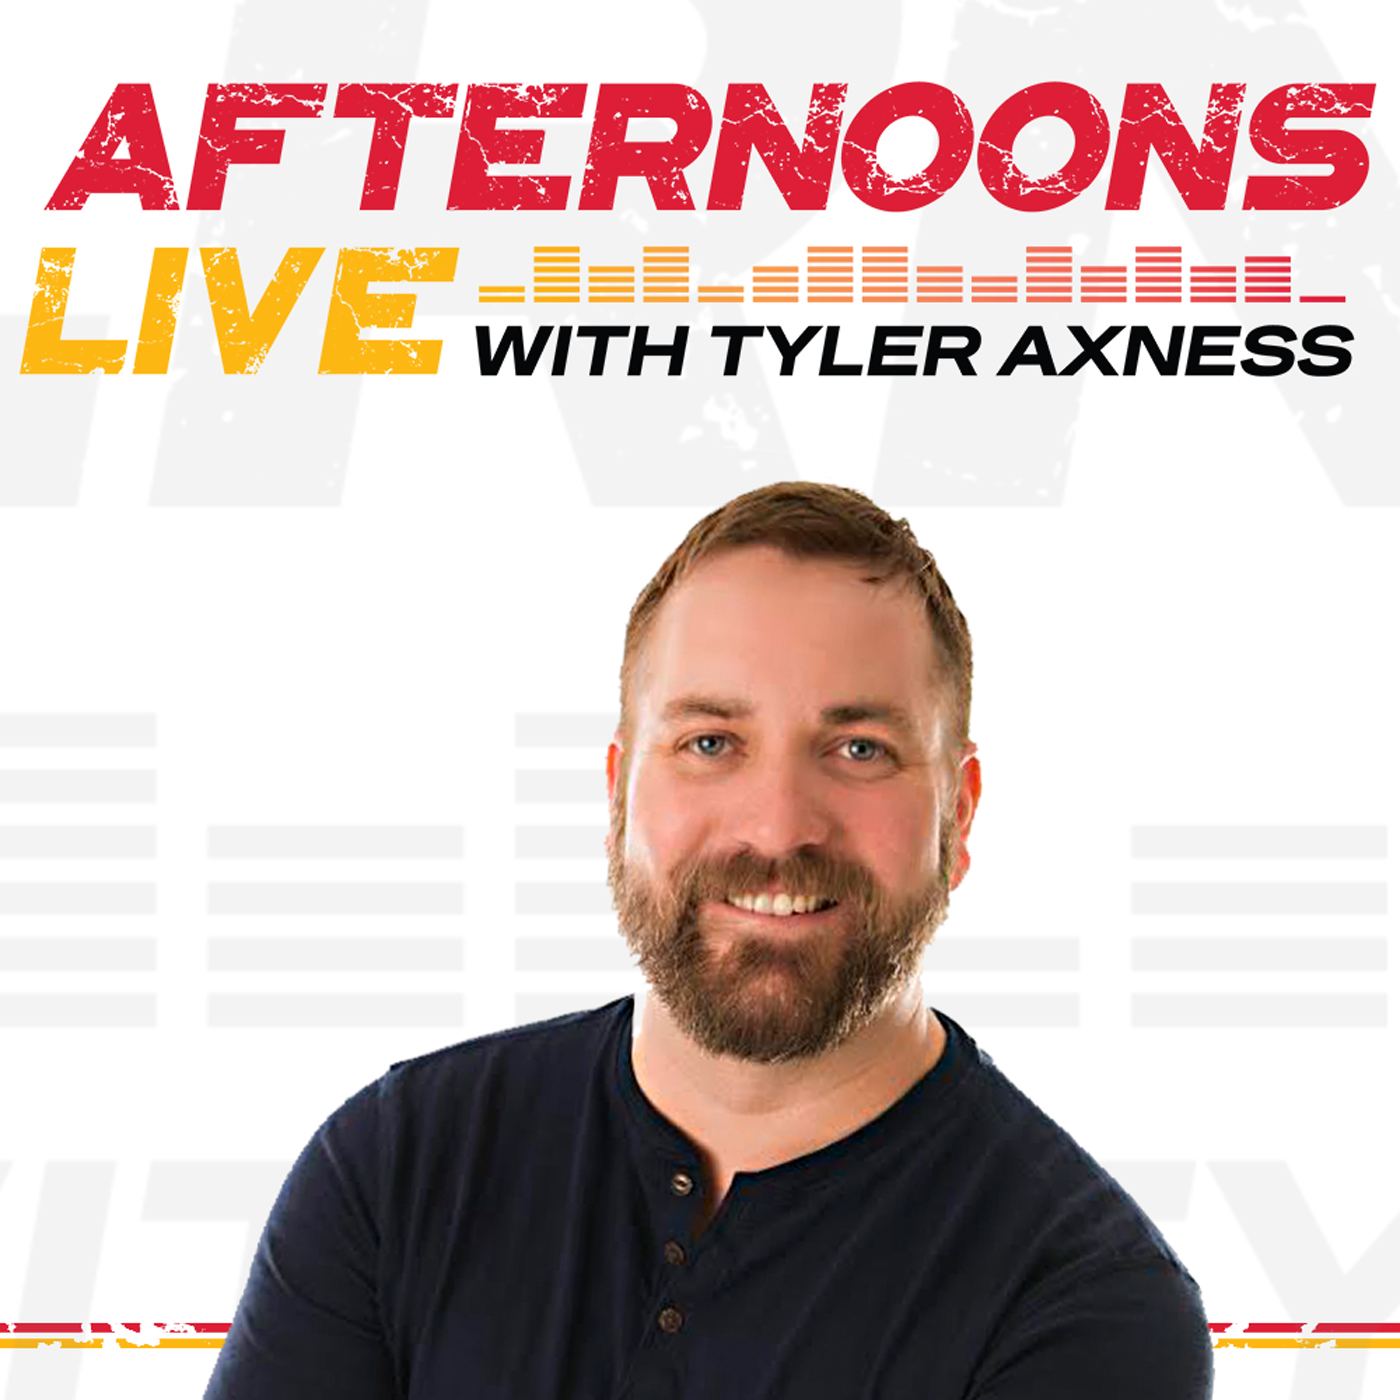 Jim Shaw Joins Afternoons Live with Tyler Axness